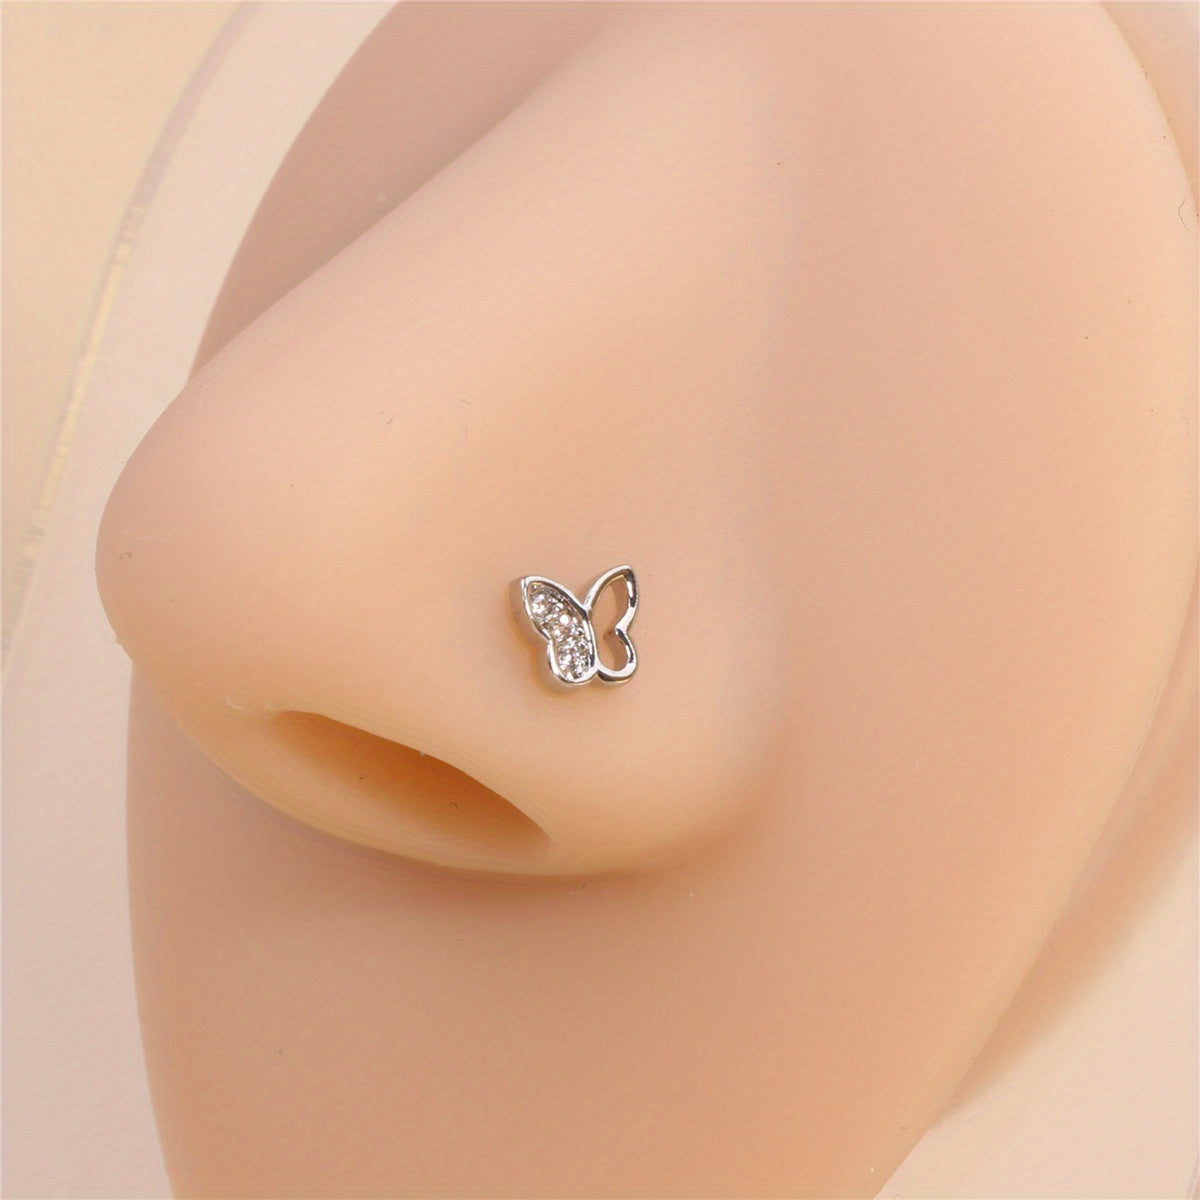 1Pc Hollow Butterfly Shape Nose Rings Inlaid Shiny Zircon L Shape Nose Stud Ring For Women Body Piercing Jewelry